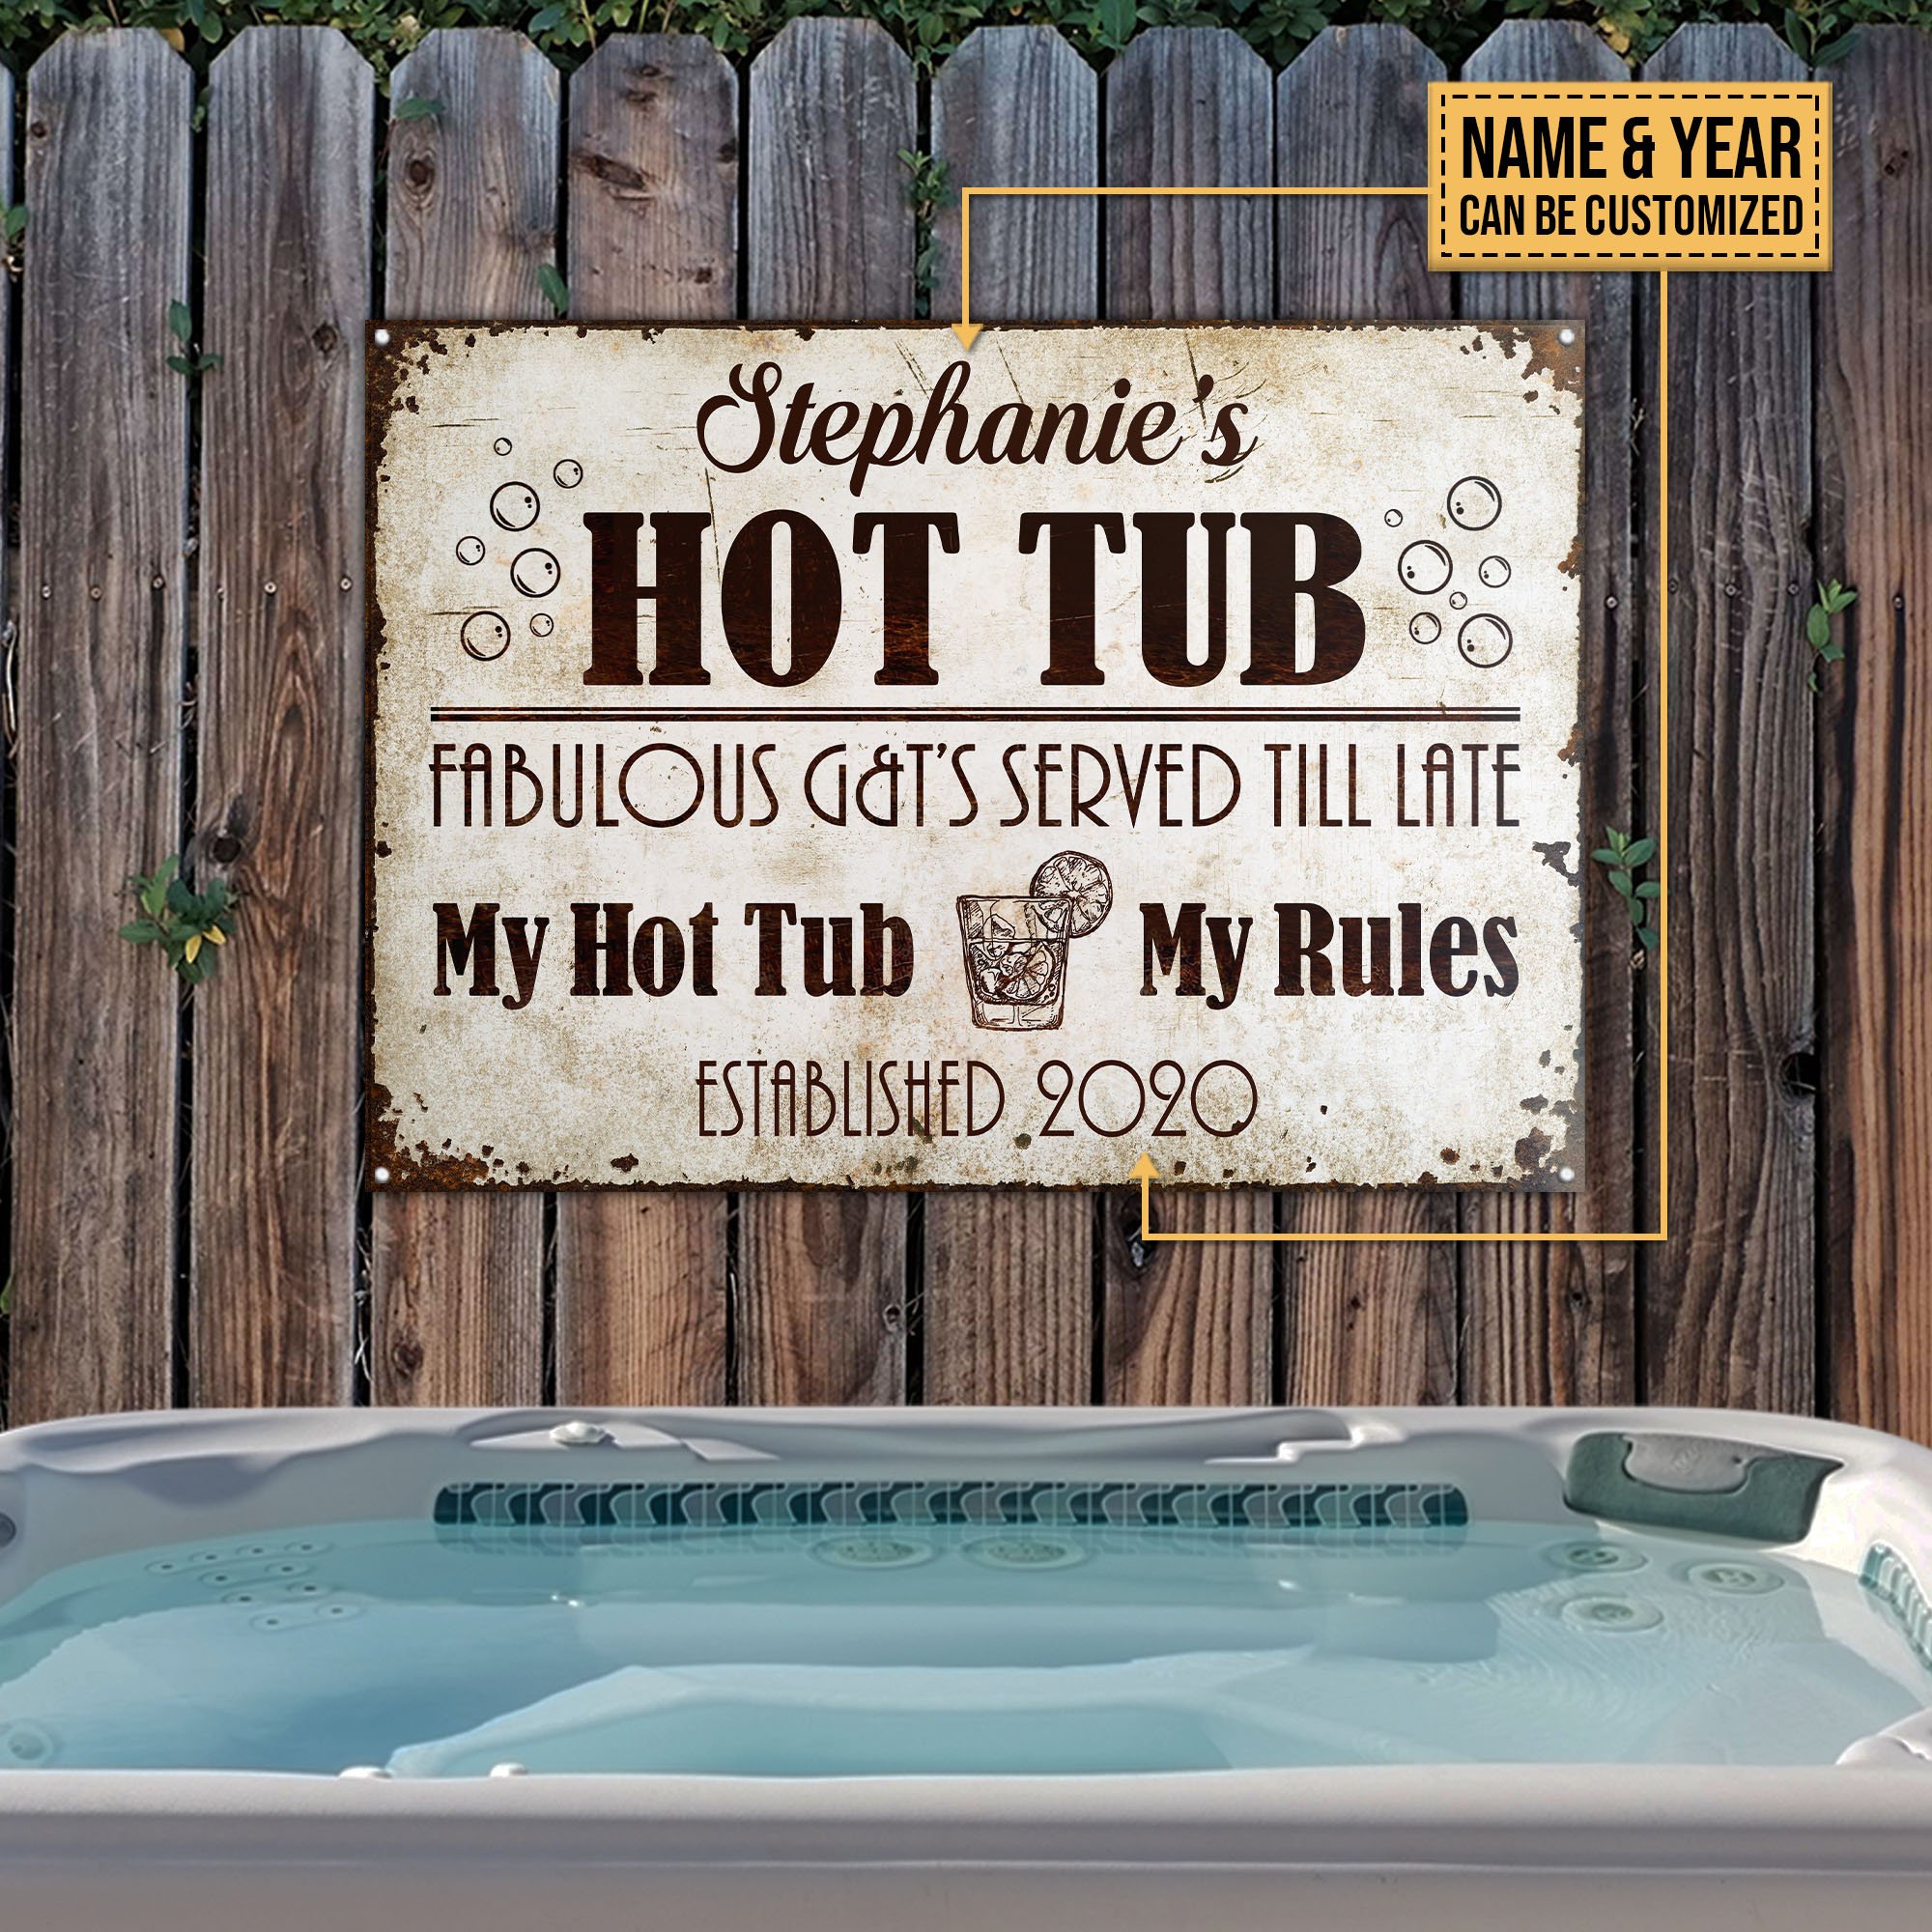 Personalized Hot Tub Fabulous G&T Customized Classic Metal Signs